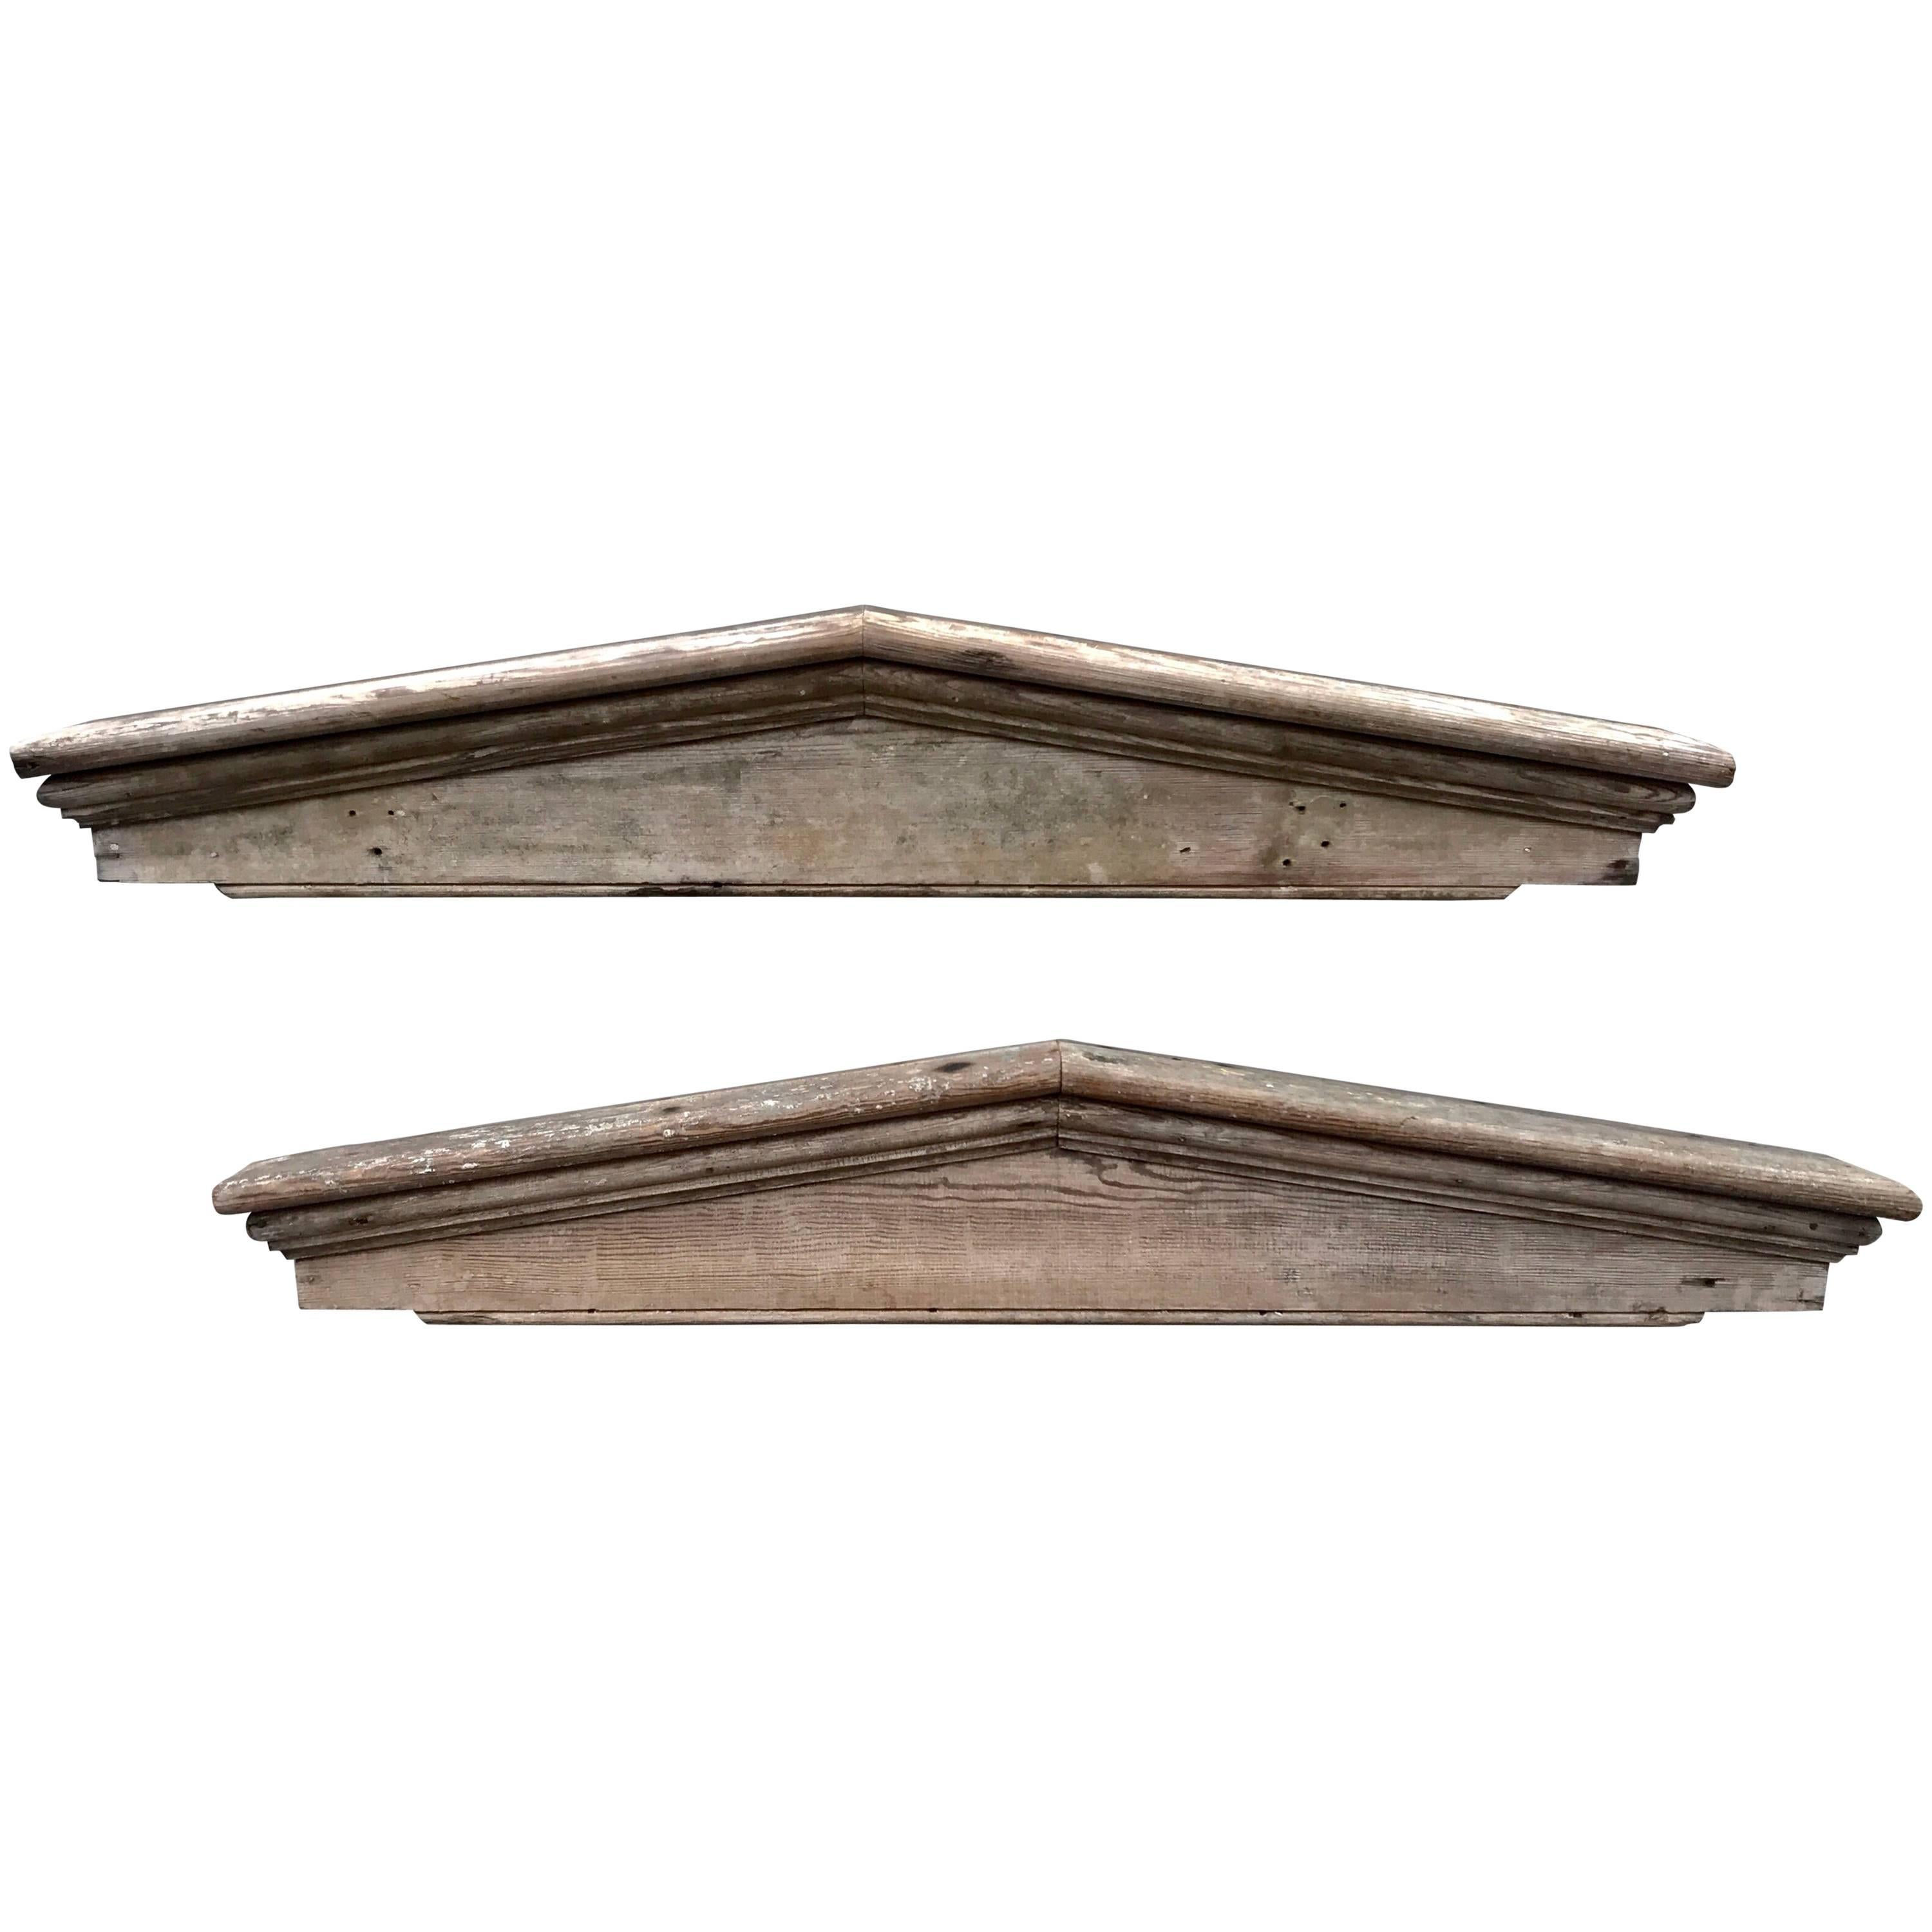 Architectural Pediments of Whitewashed Pine, Pair